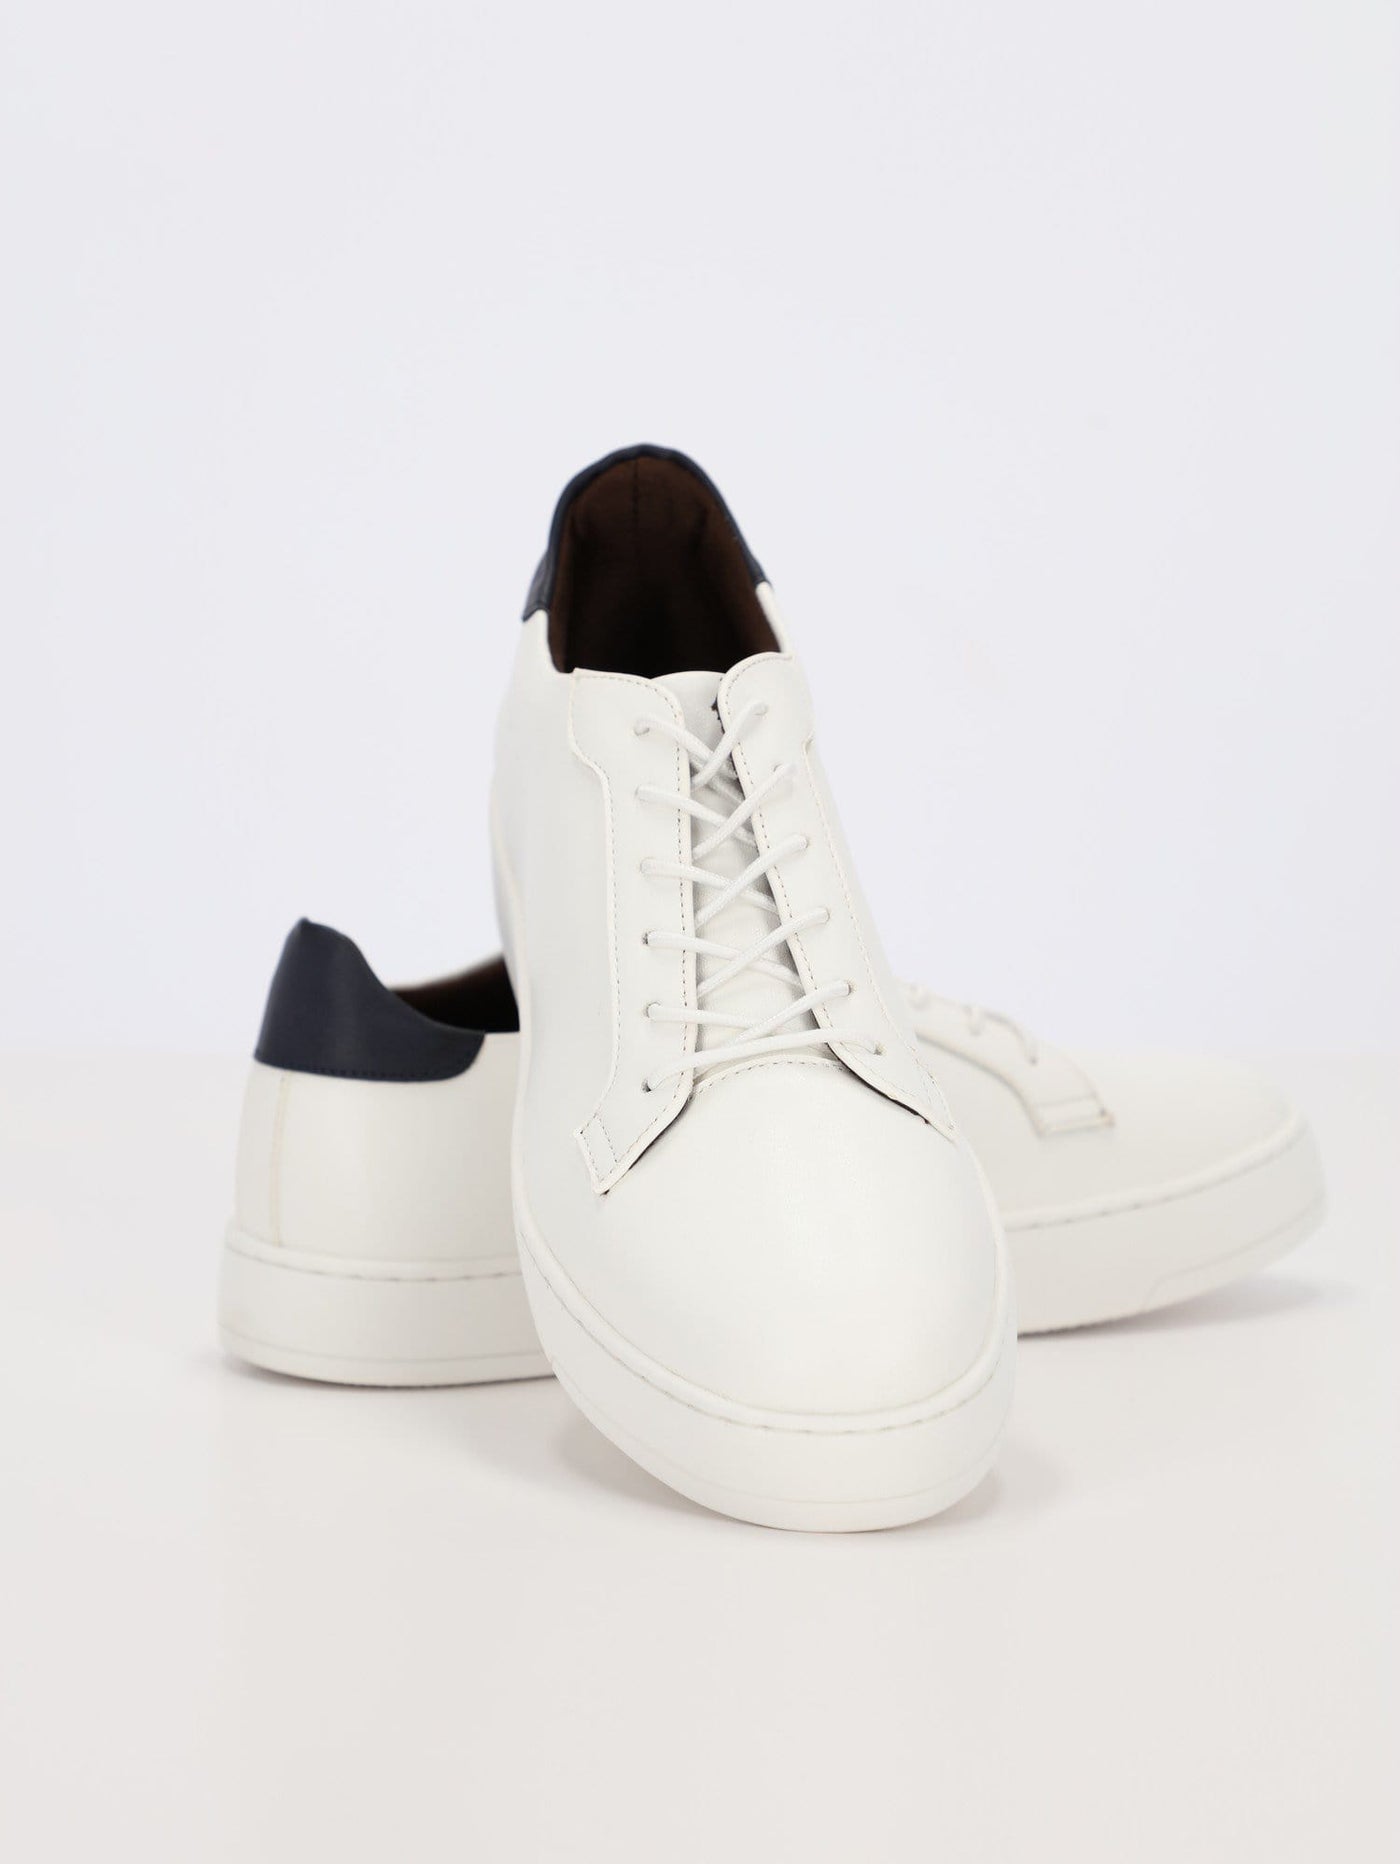 OR Shoes White / 41 Leather upper Low Profile Shoes